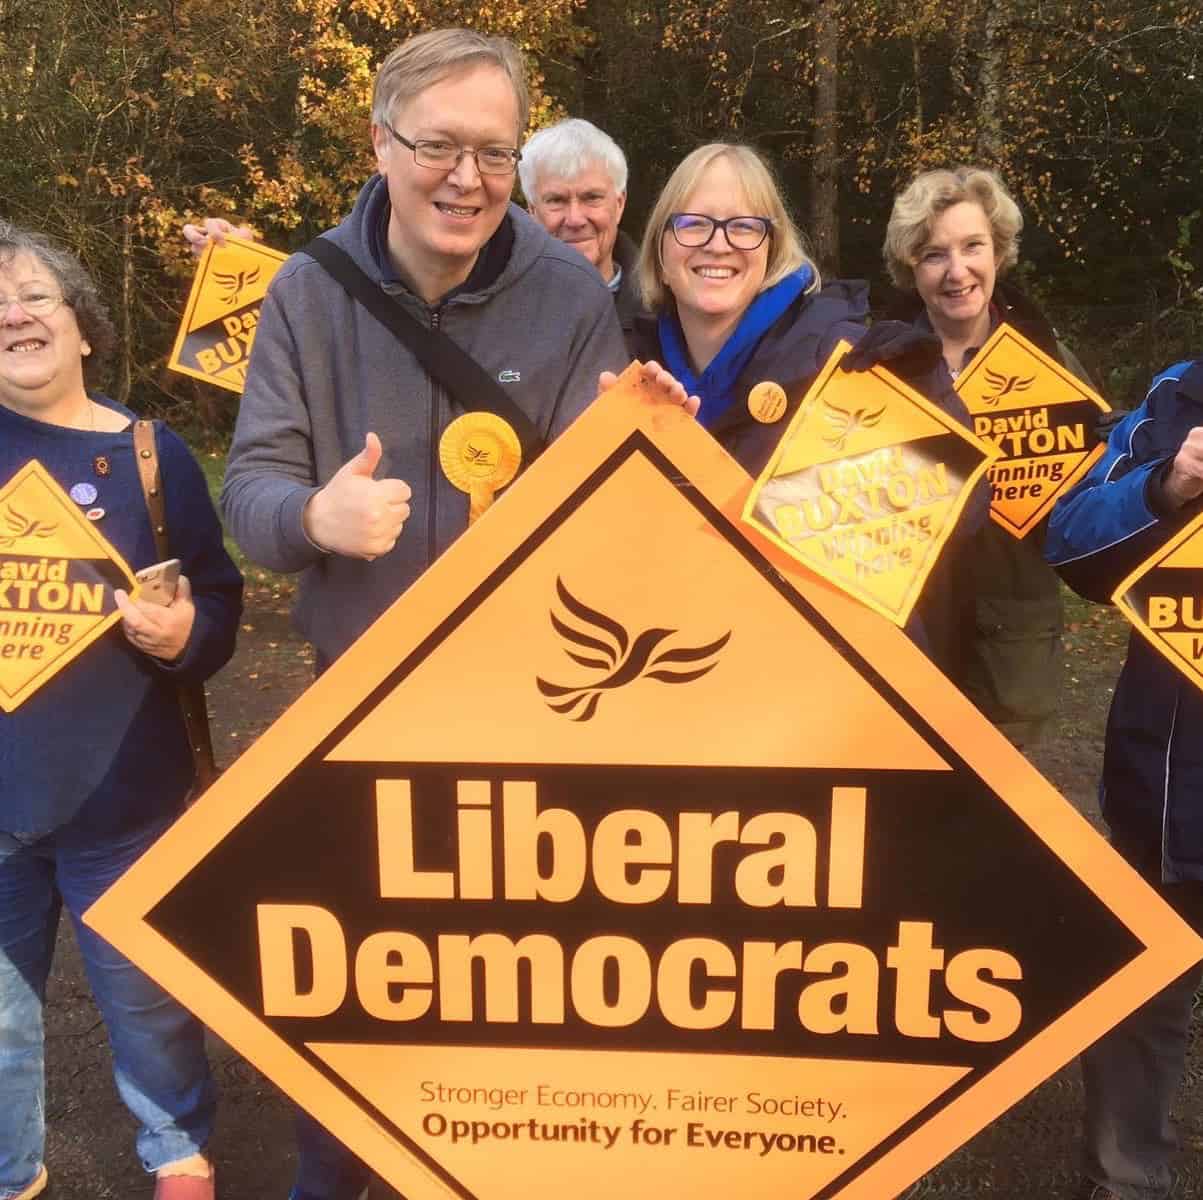 Group of smiling people holding a large liberal democrats sign and campaign placards in an outdoor setting.